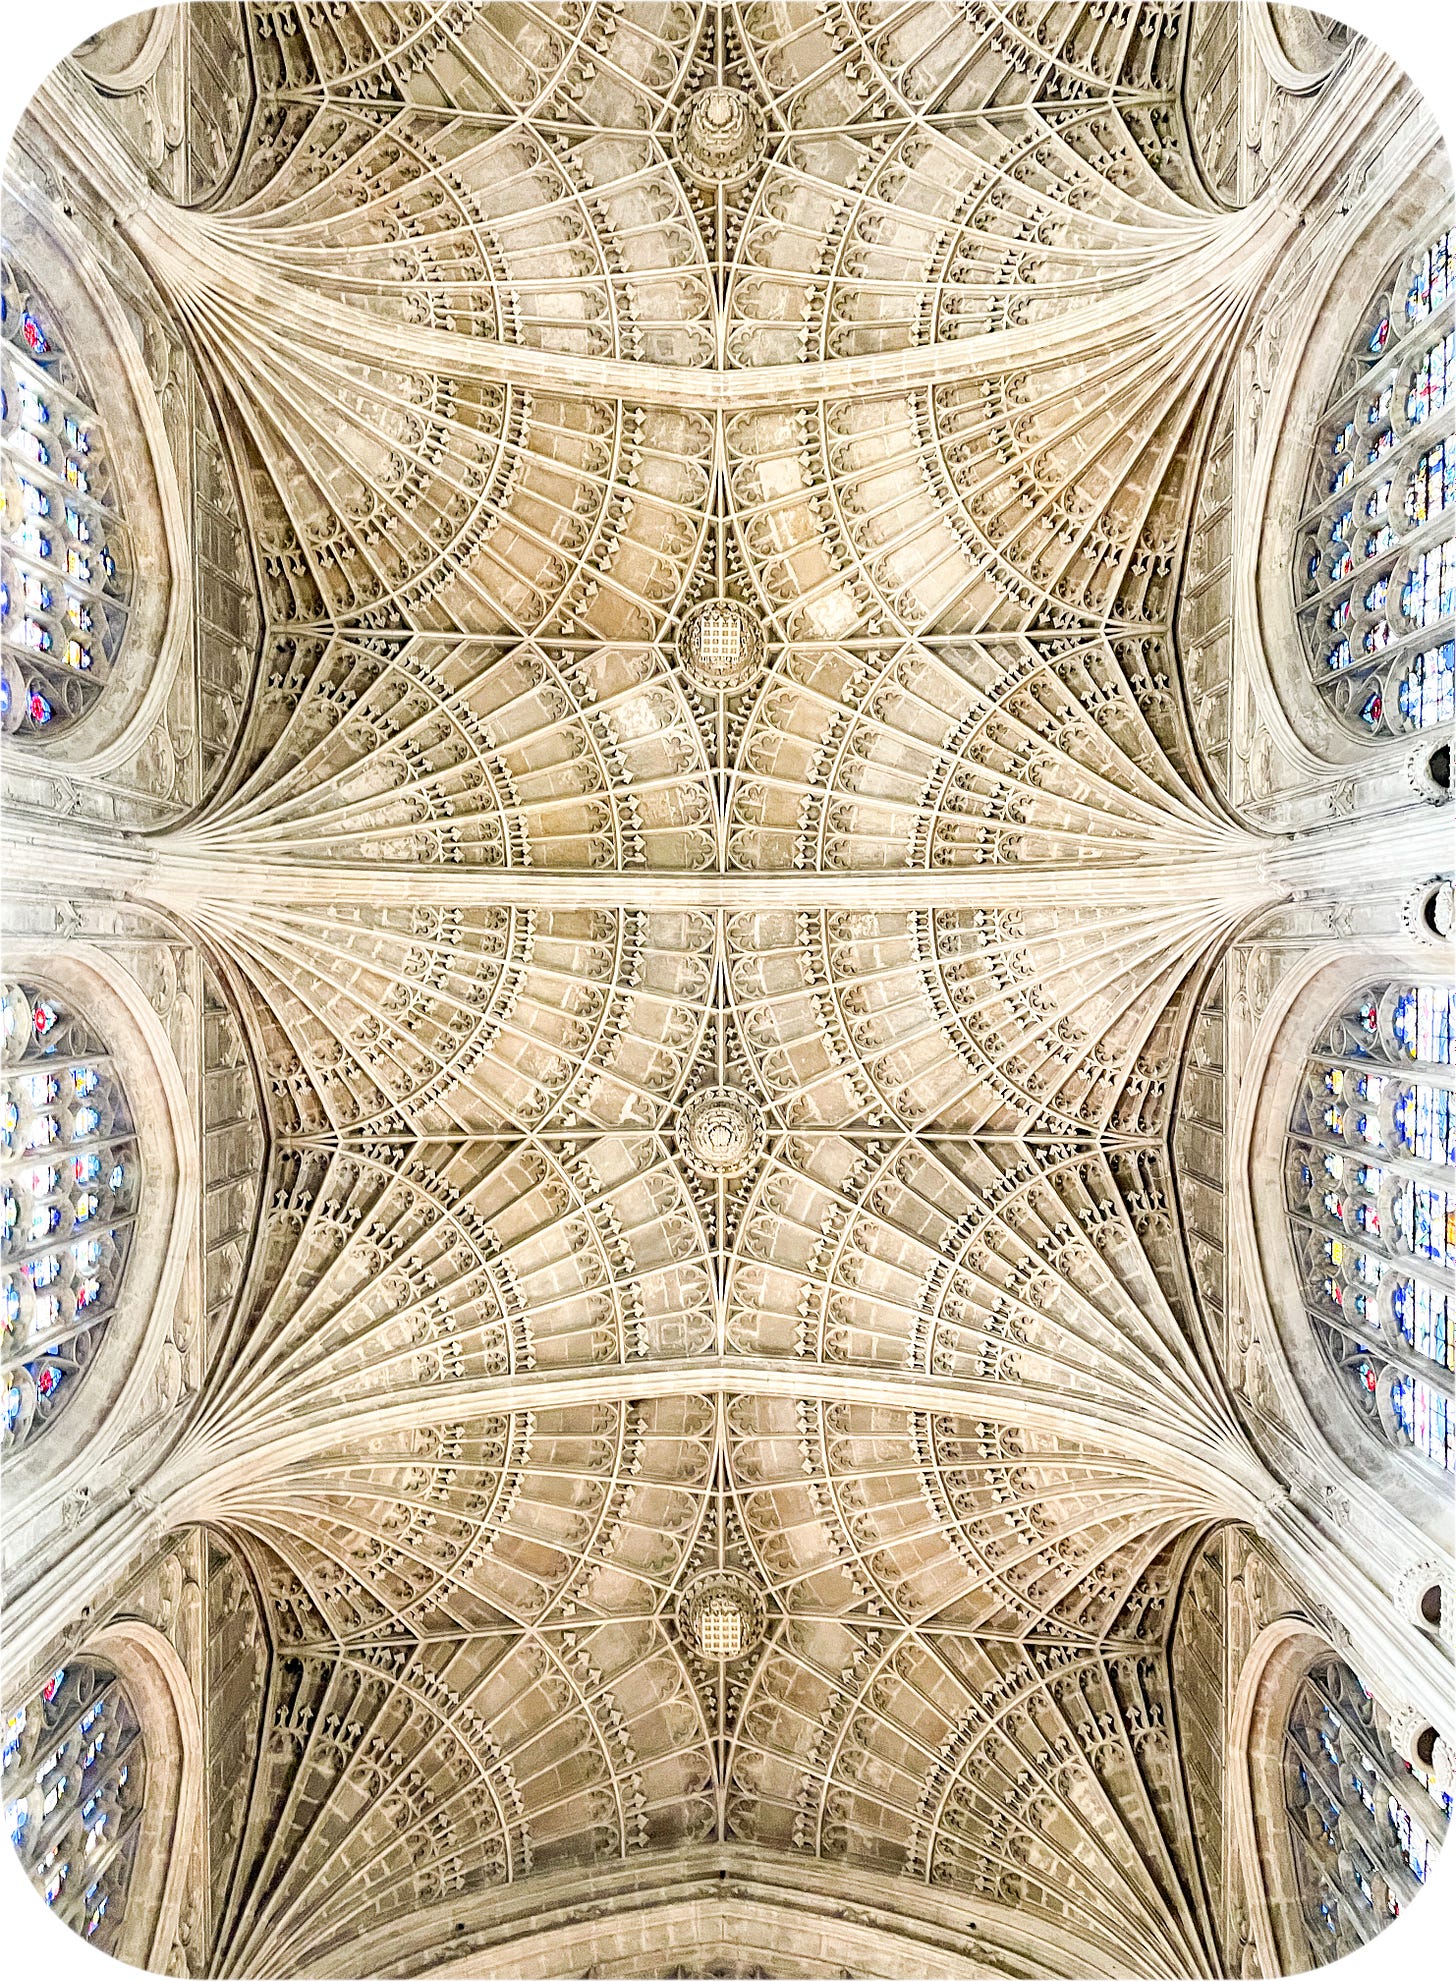 Ceiling of King's College Chapel, Cambrige, England